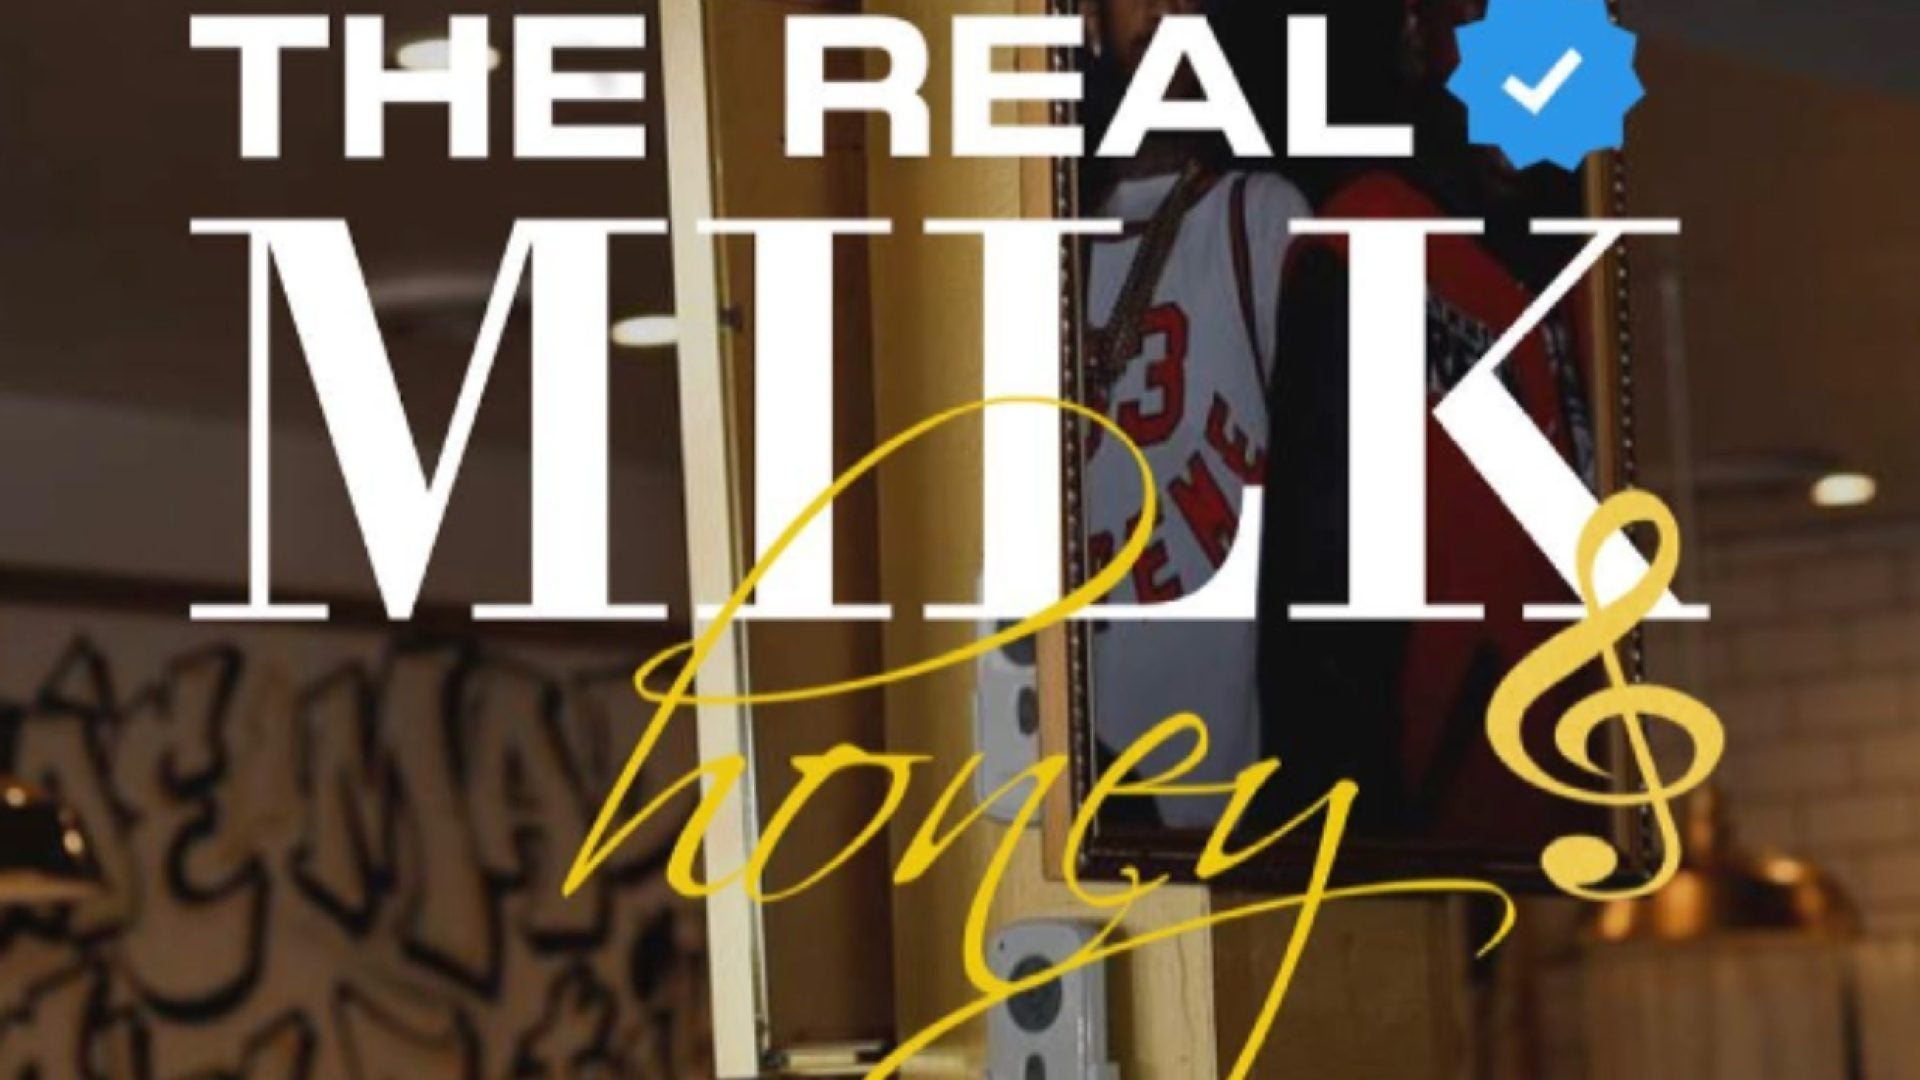 Op-Ed: In Defense Of Atlanta's The Real Milk & Honey, Black Establishments Should Be Allowed To Have An Off Day